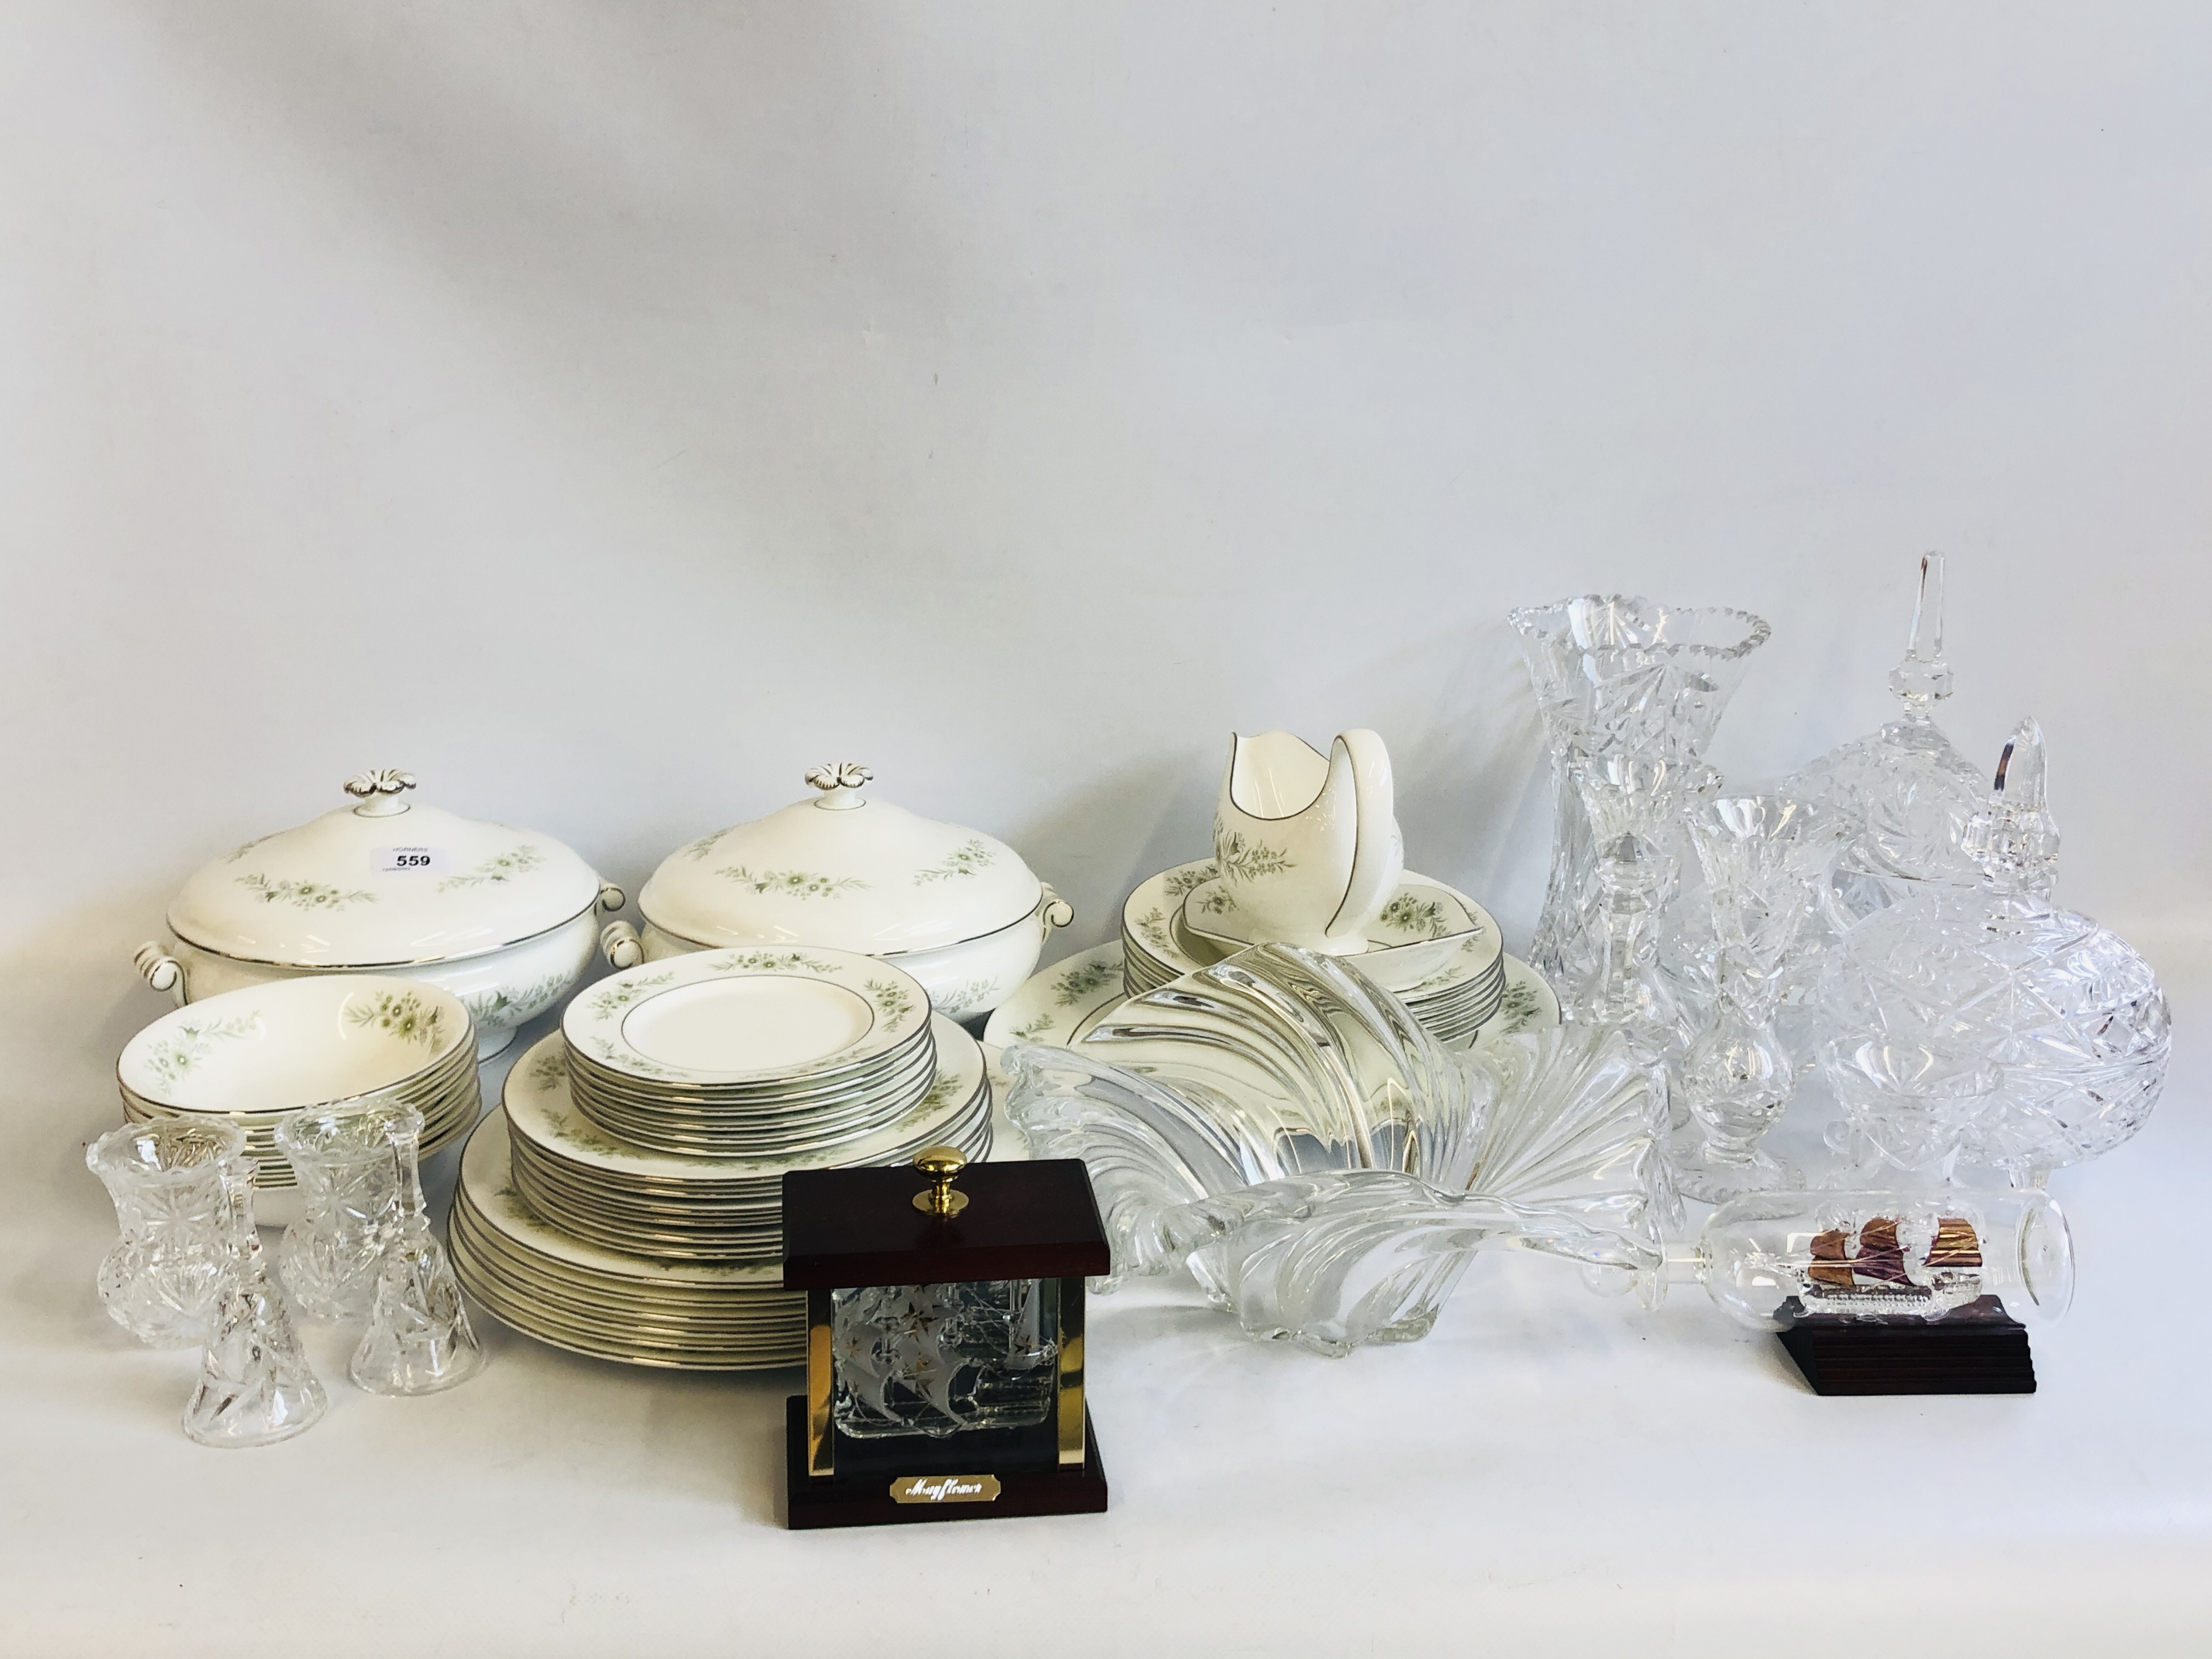 A 35 PIECE SIX PLACE SETTING OF WEDGWOOD WESTBURY BONE CHINA TABLE WARE PLUS A COLLECTION OF GOOD